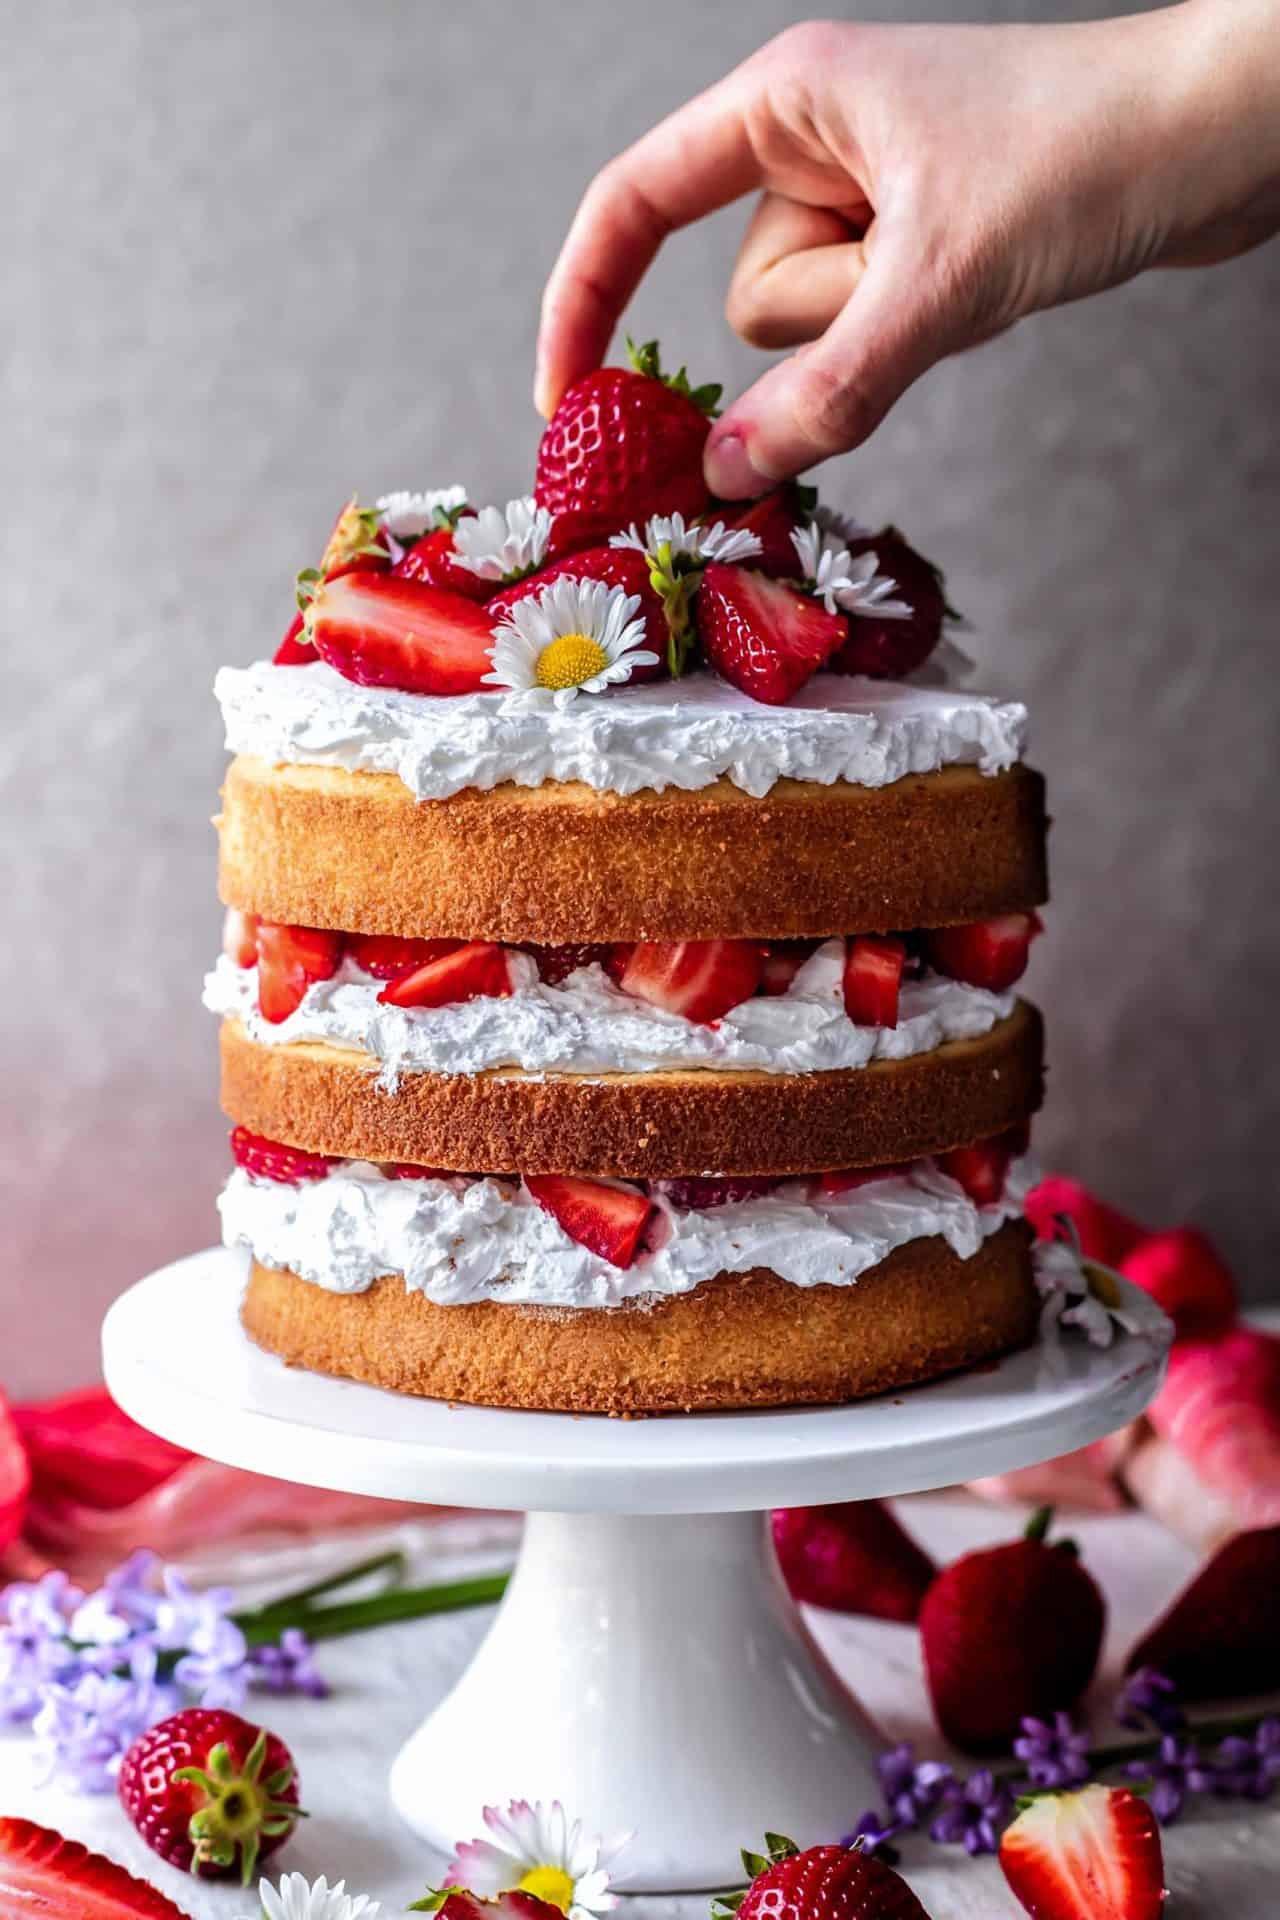 This Gluten-Free Strawberry and Cream Cake is extra fluffy, light, super creamy, incredibly simple to make, flavourful and just so delicious!
